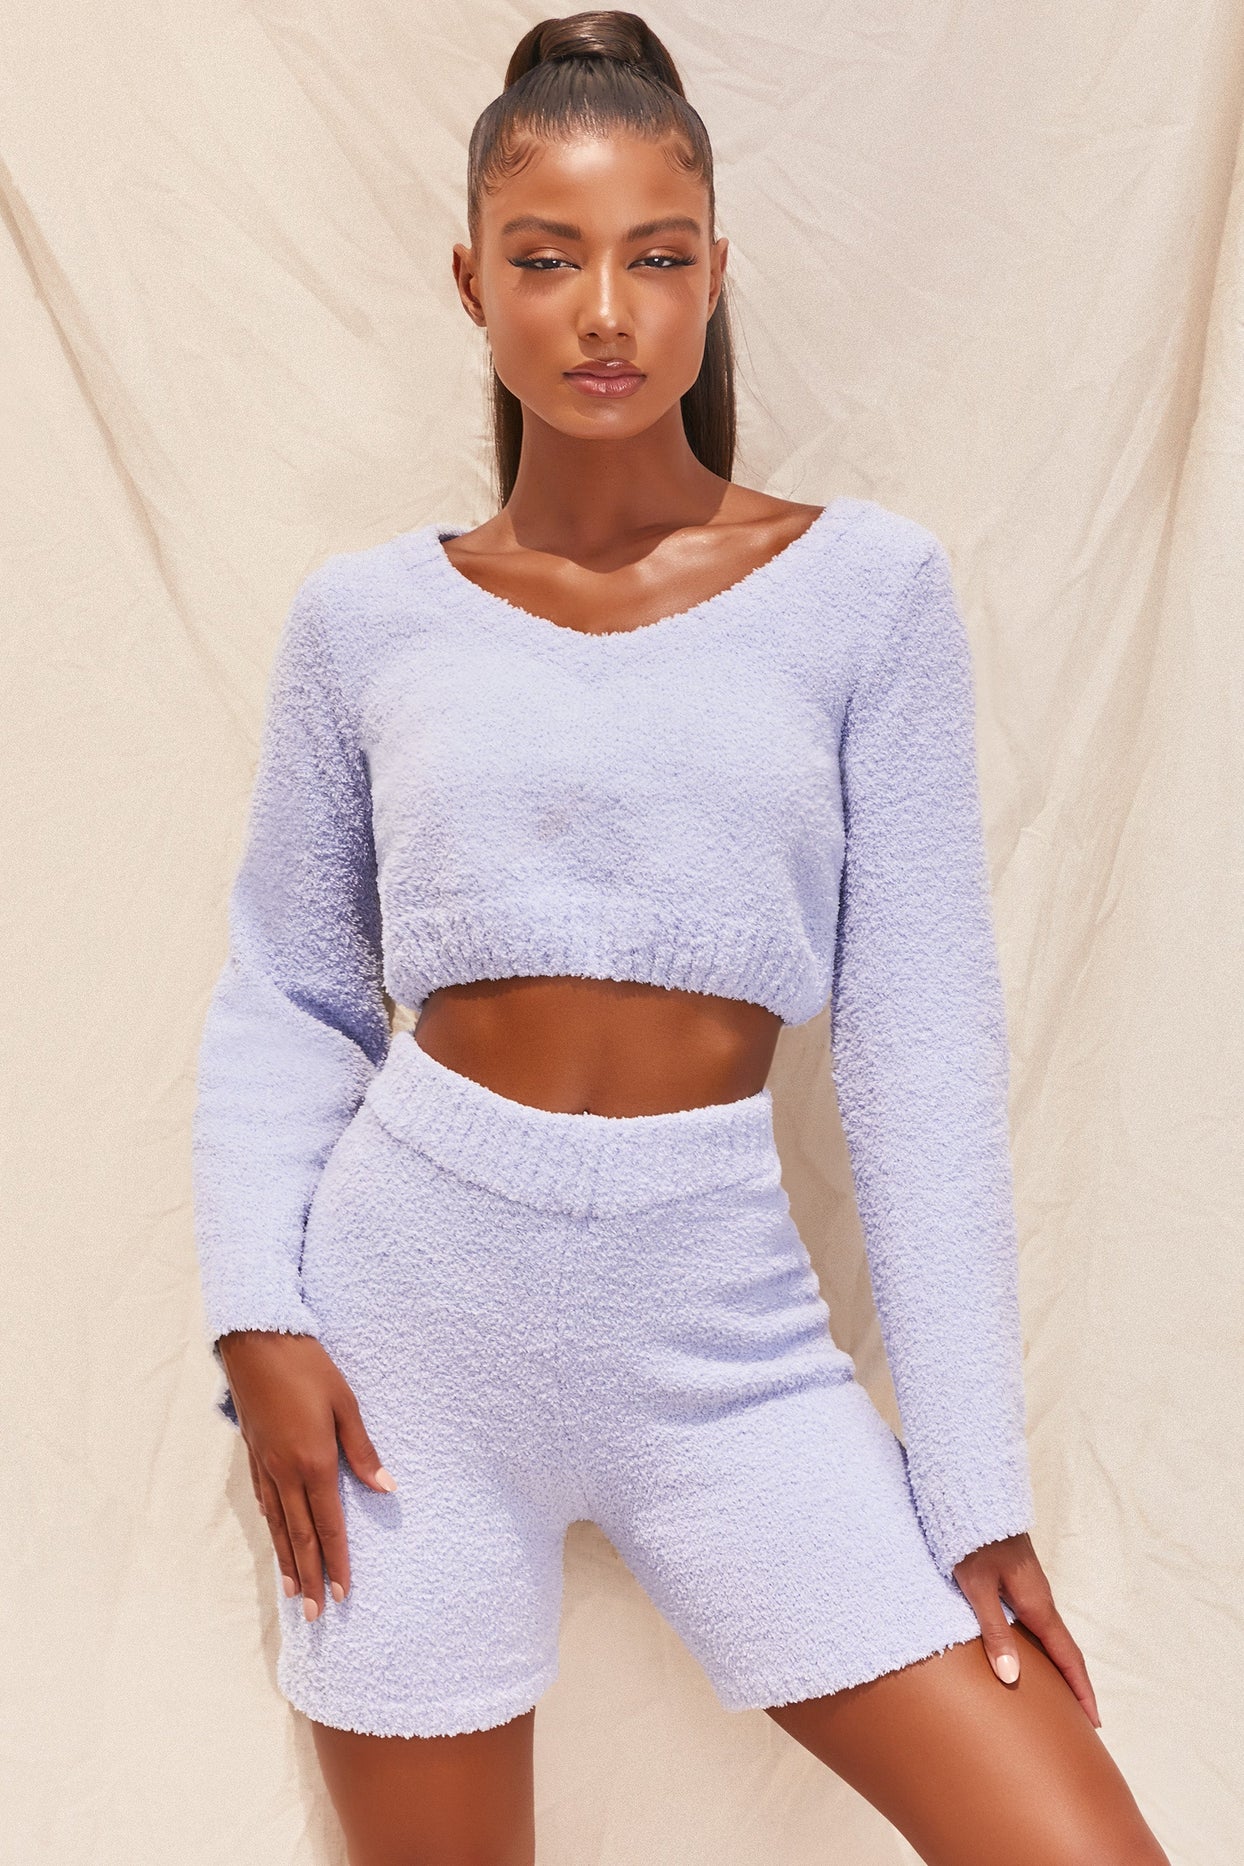 Cosy Lounge Shorts in Baby Blue